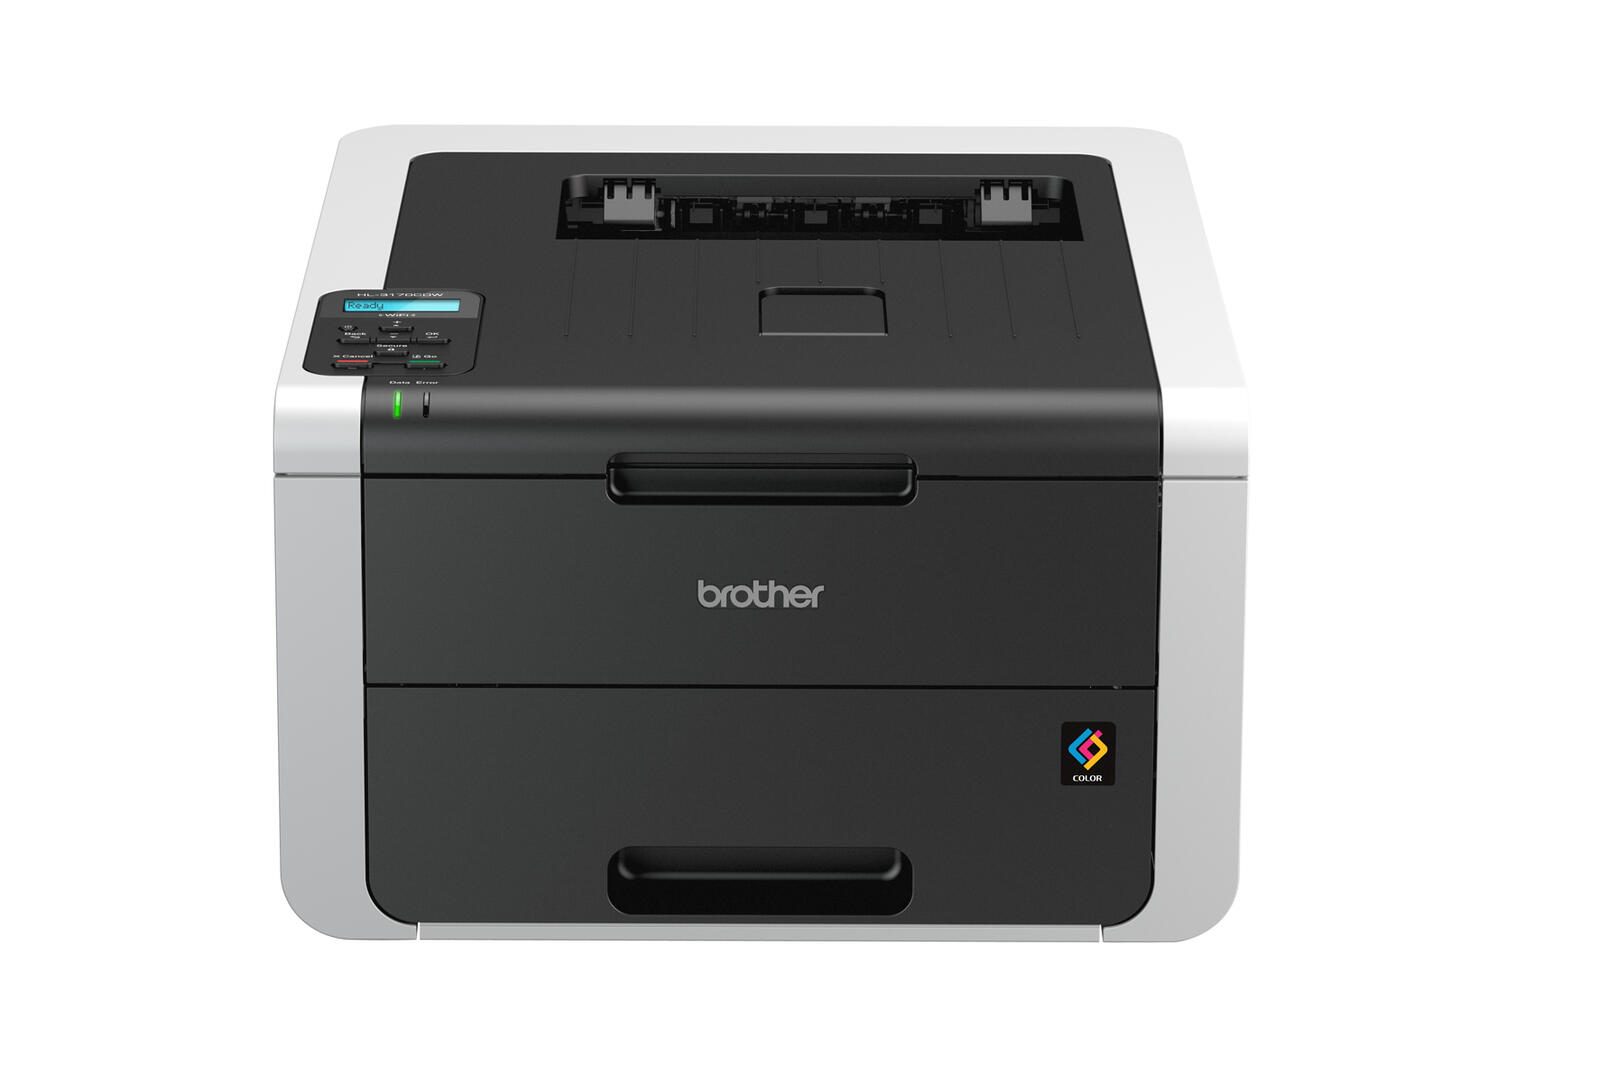 Brother HL-3170 CDW